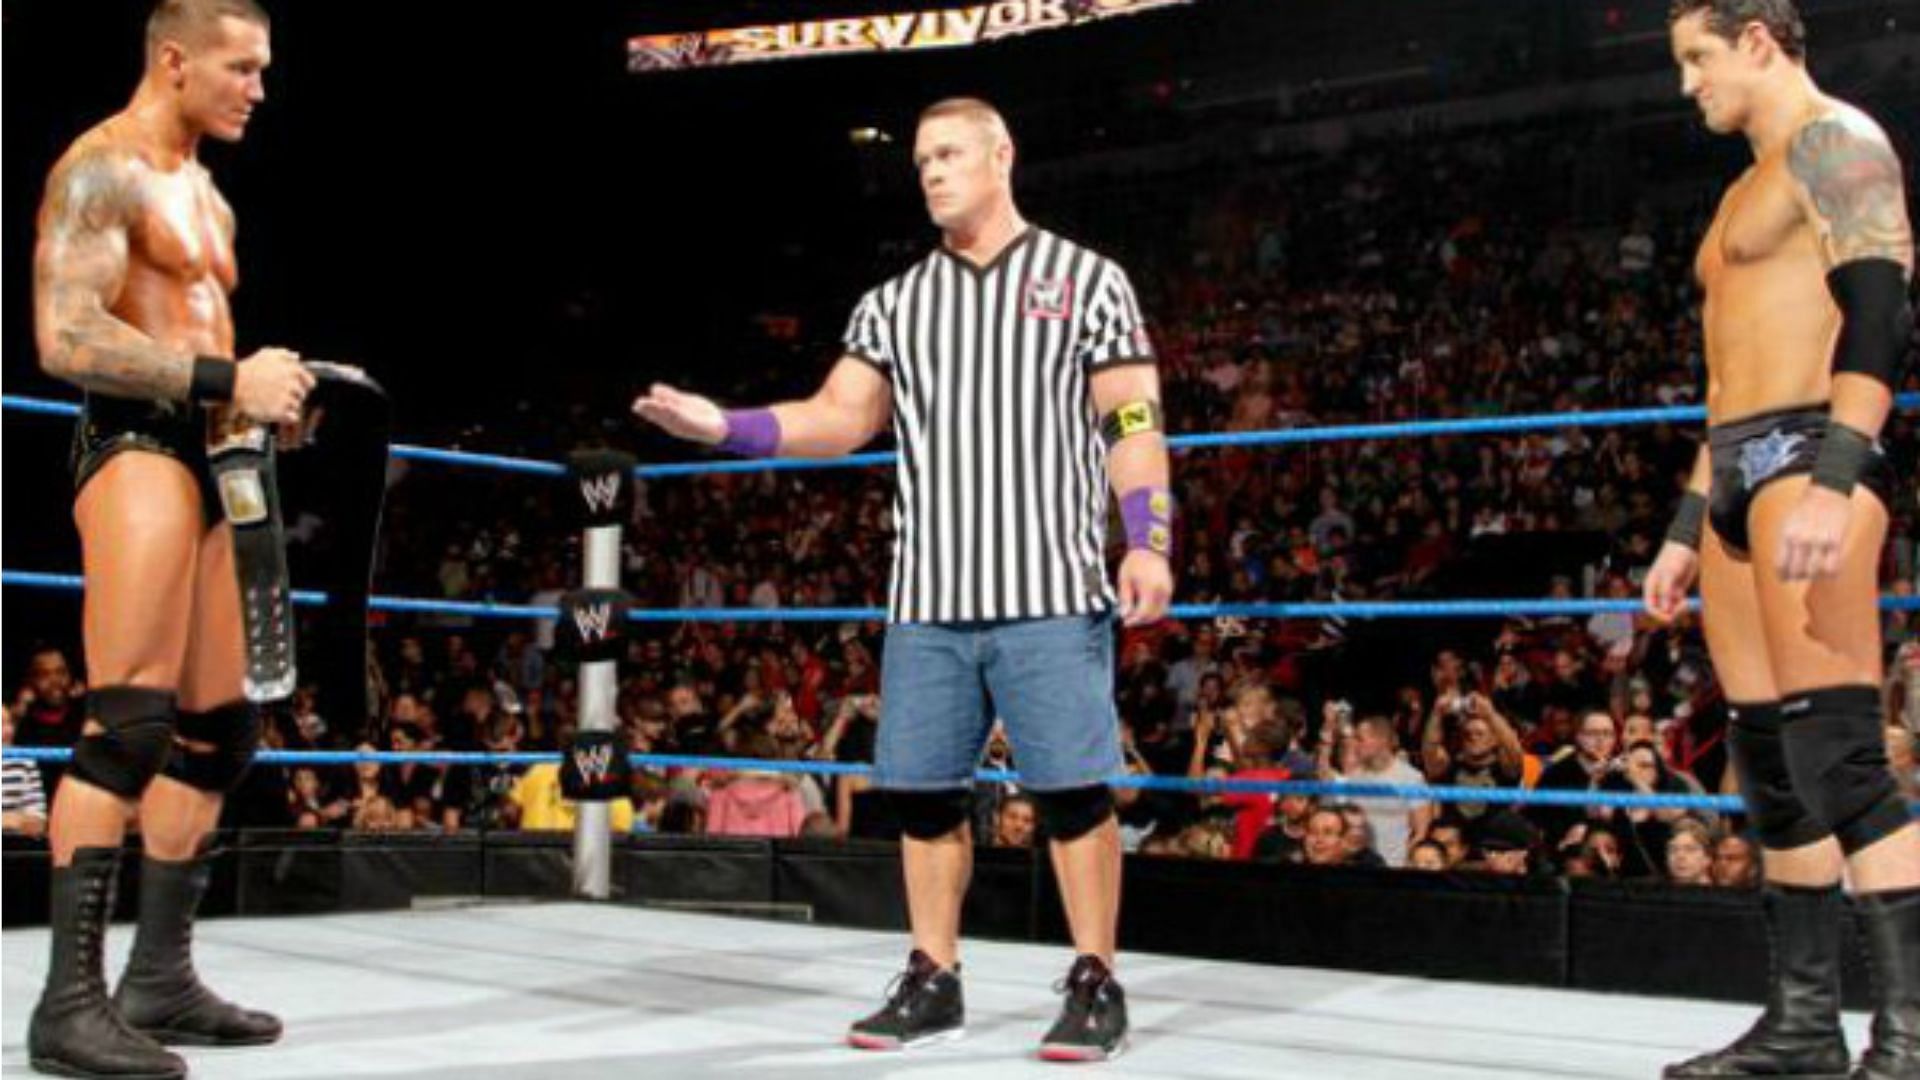 The match was dubbed &quot;Free or Fired&quot; with John Cena&#039;s career on the line.